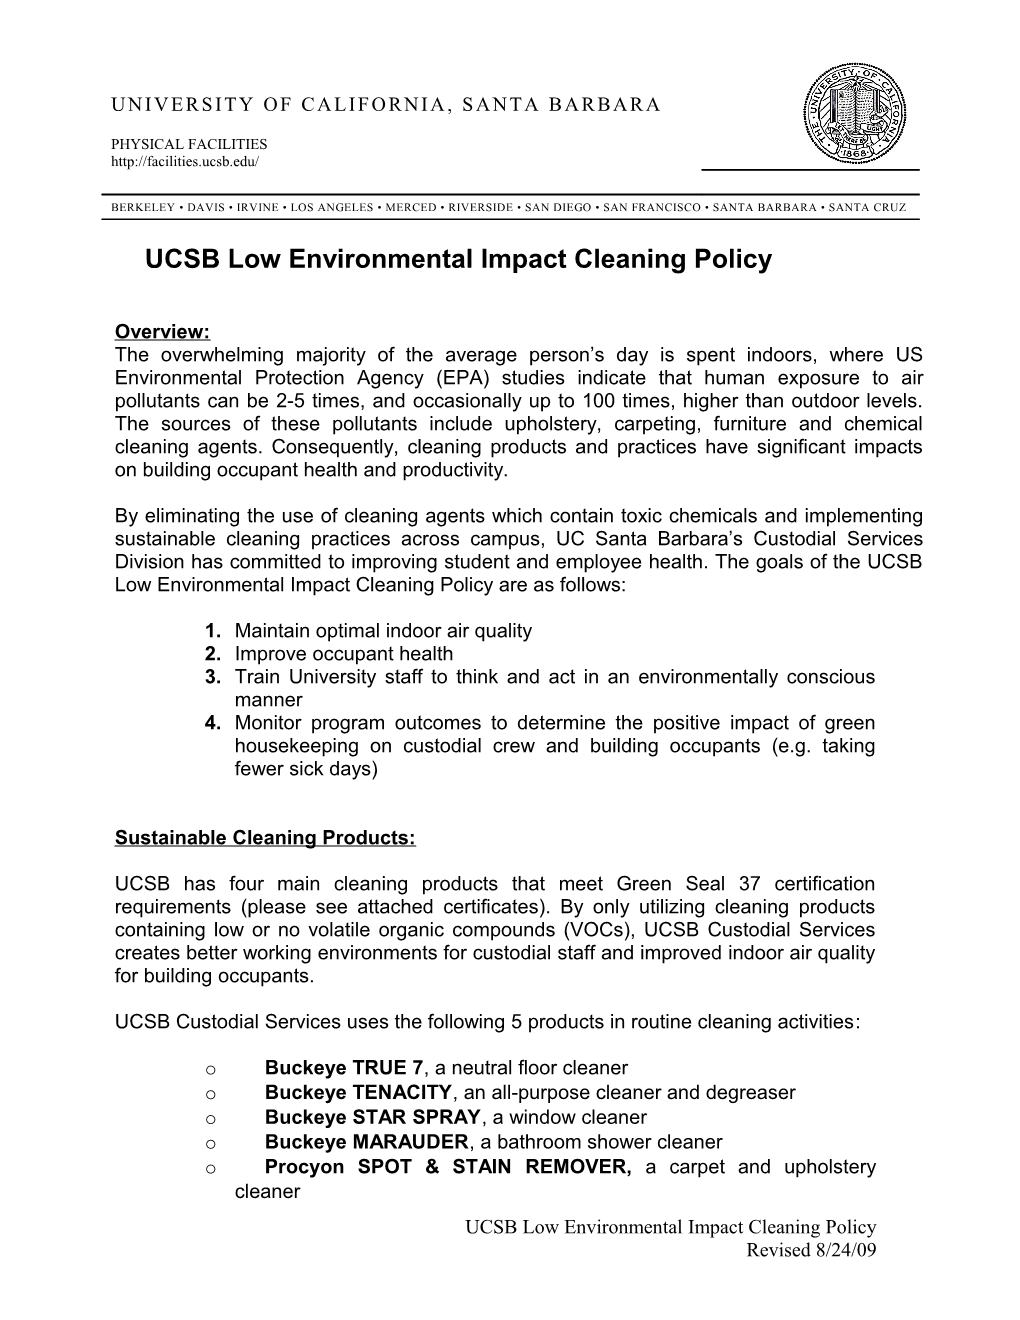 Green Cleaning- Low Environmental Impact Cleaning Policy